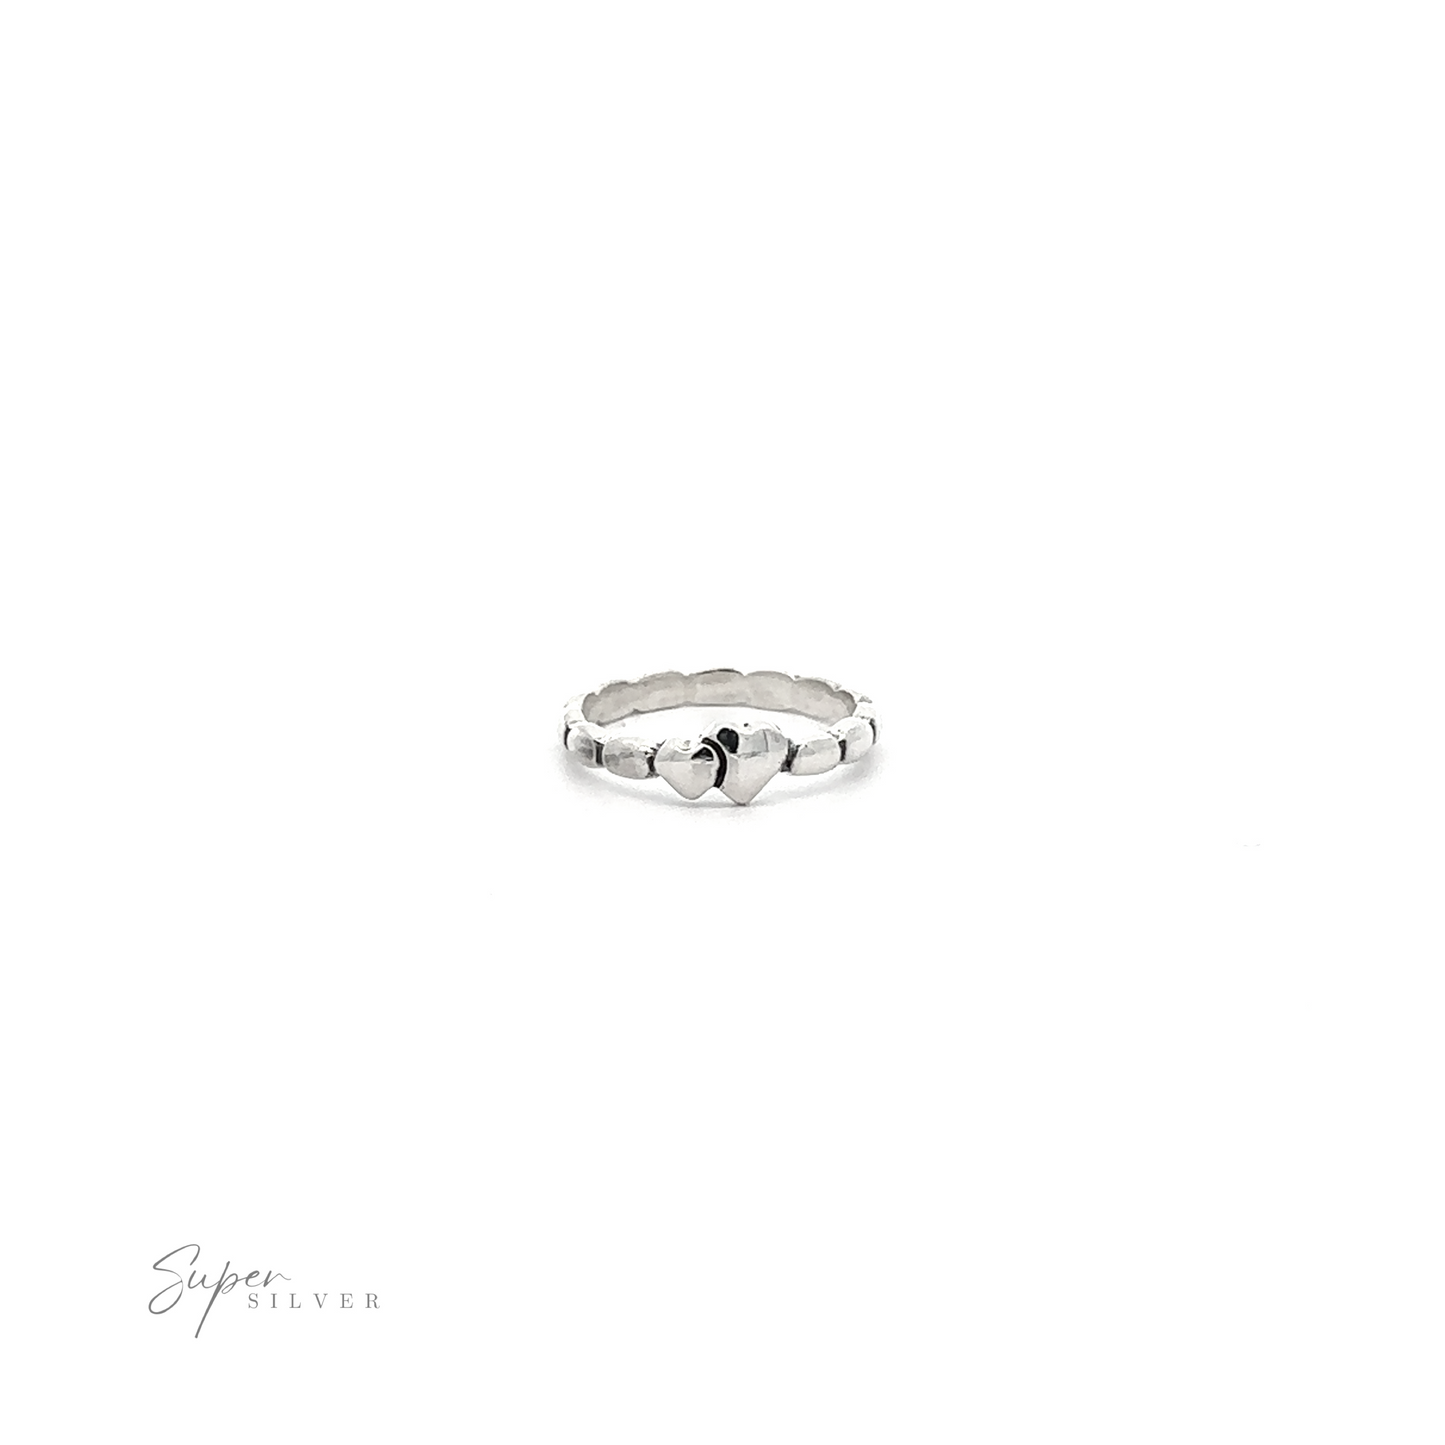 
                  
                    A Dainty Double Heart Band with a claddagh design displayed on a white background. The text "super silver" is written in a stylized font below the ring.
                  
                